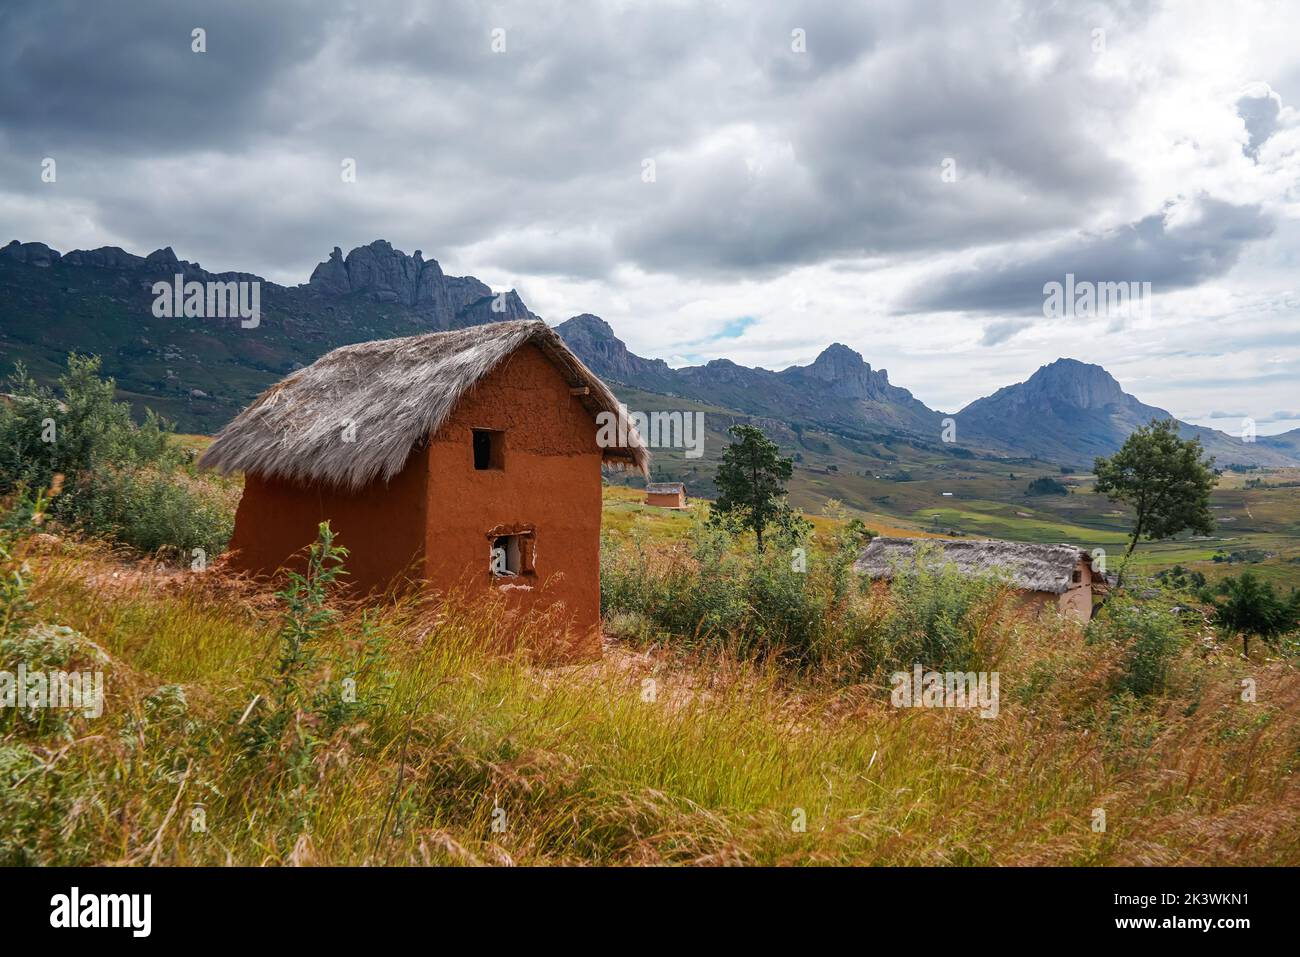 Typical landscape at Andringitra National Park, Madagascar on overcast day. Rocky mountains with rice fields under at distance, small clay house with Stock Photo